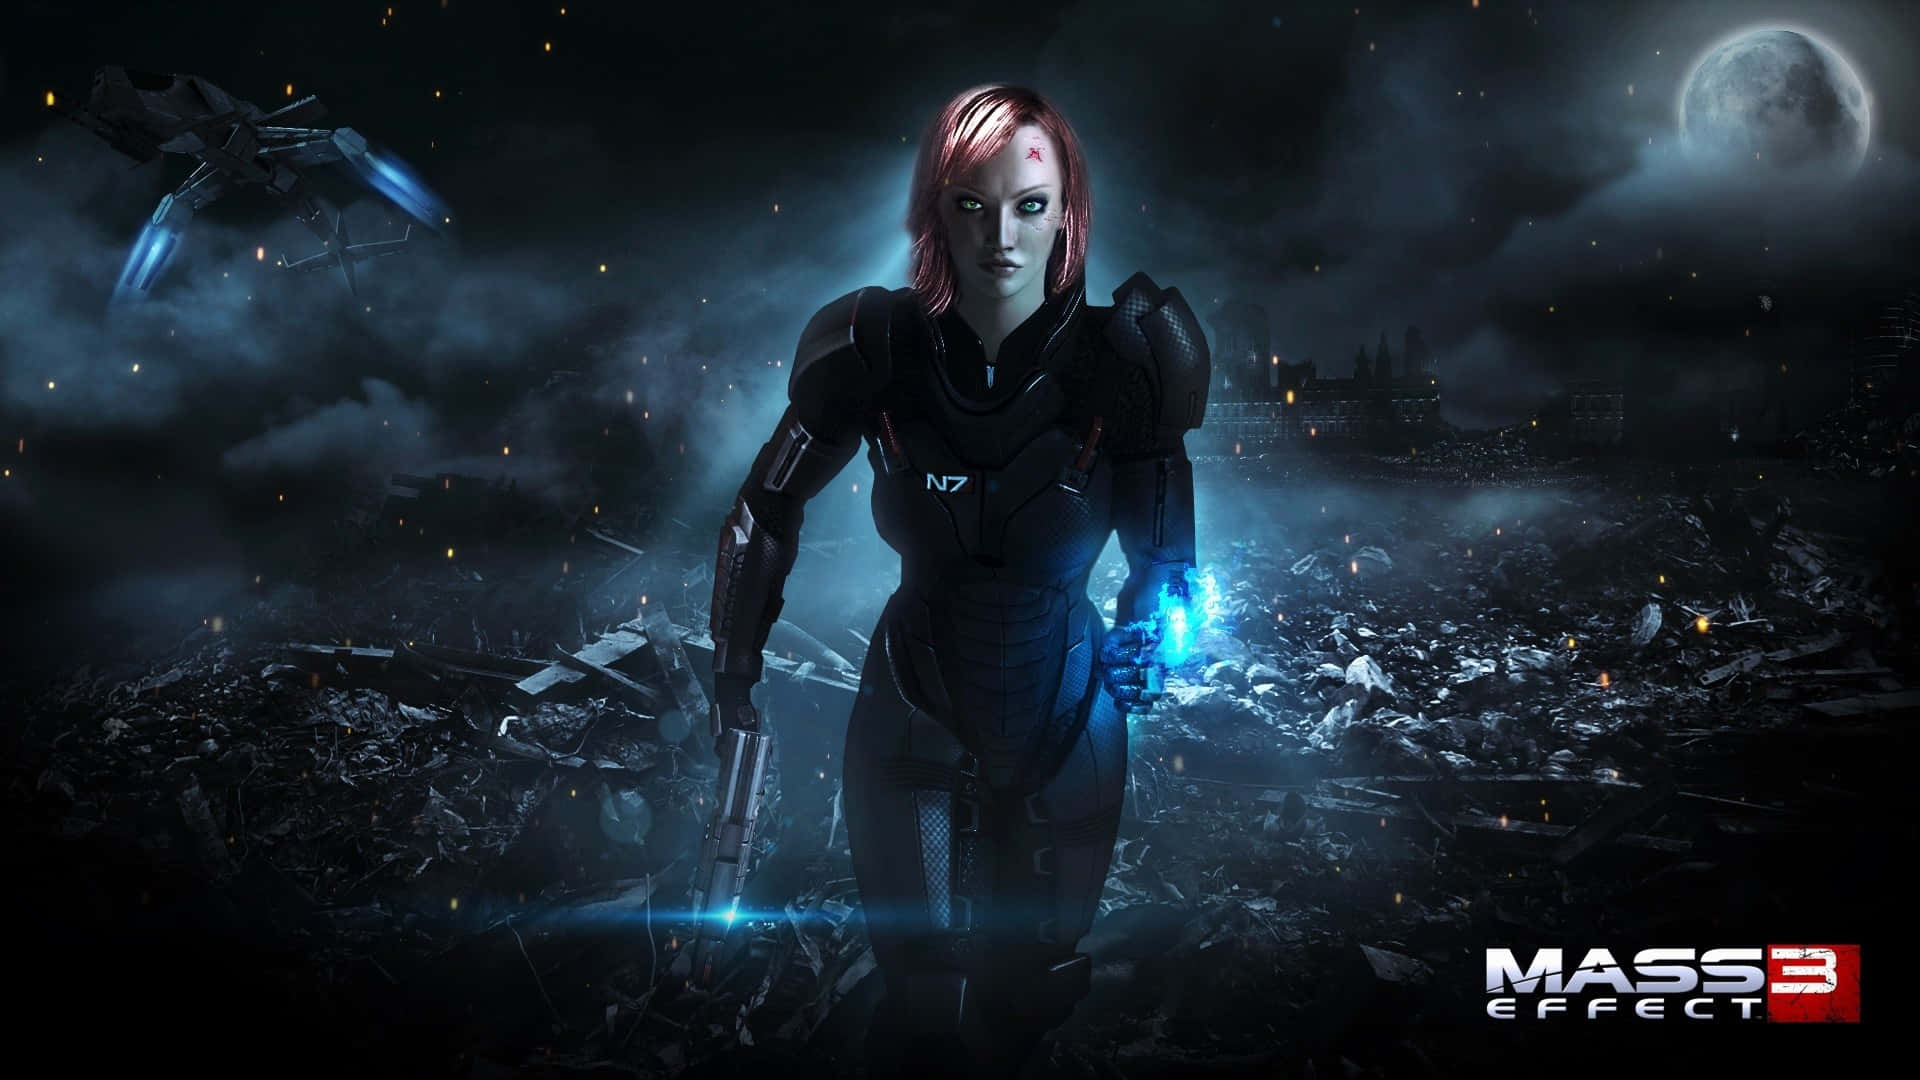 Squad members engaged in an intense battle in Mass Effect's multiplayer mode Wallpaper